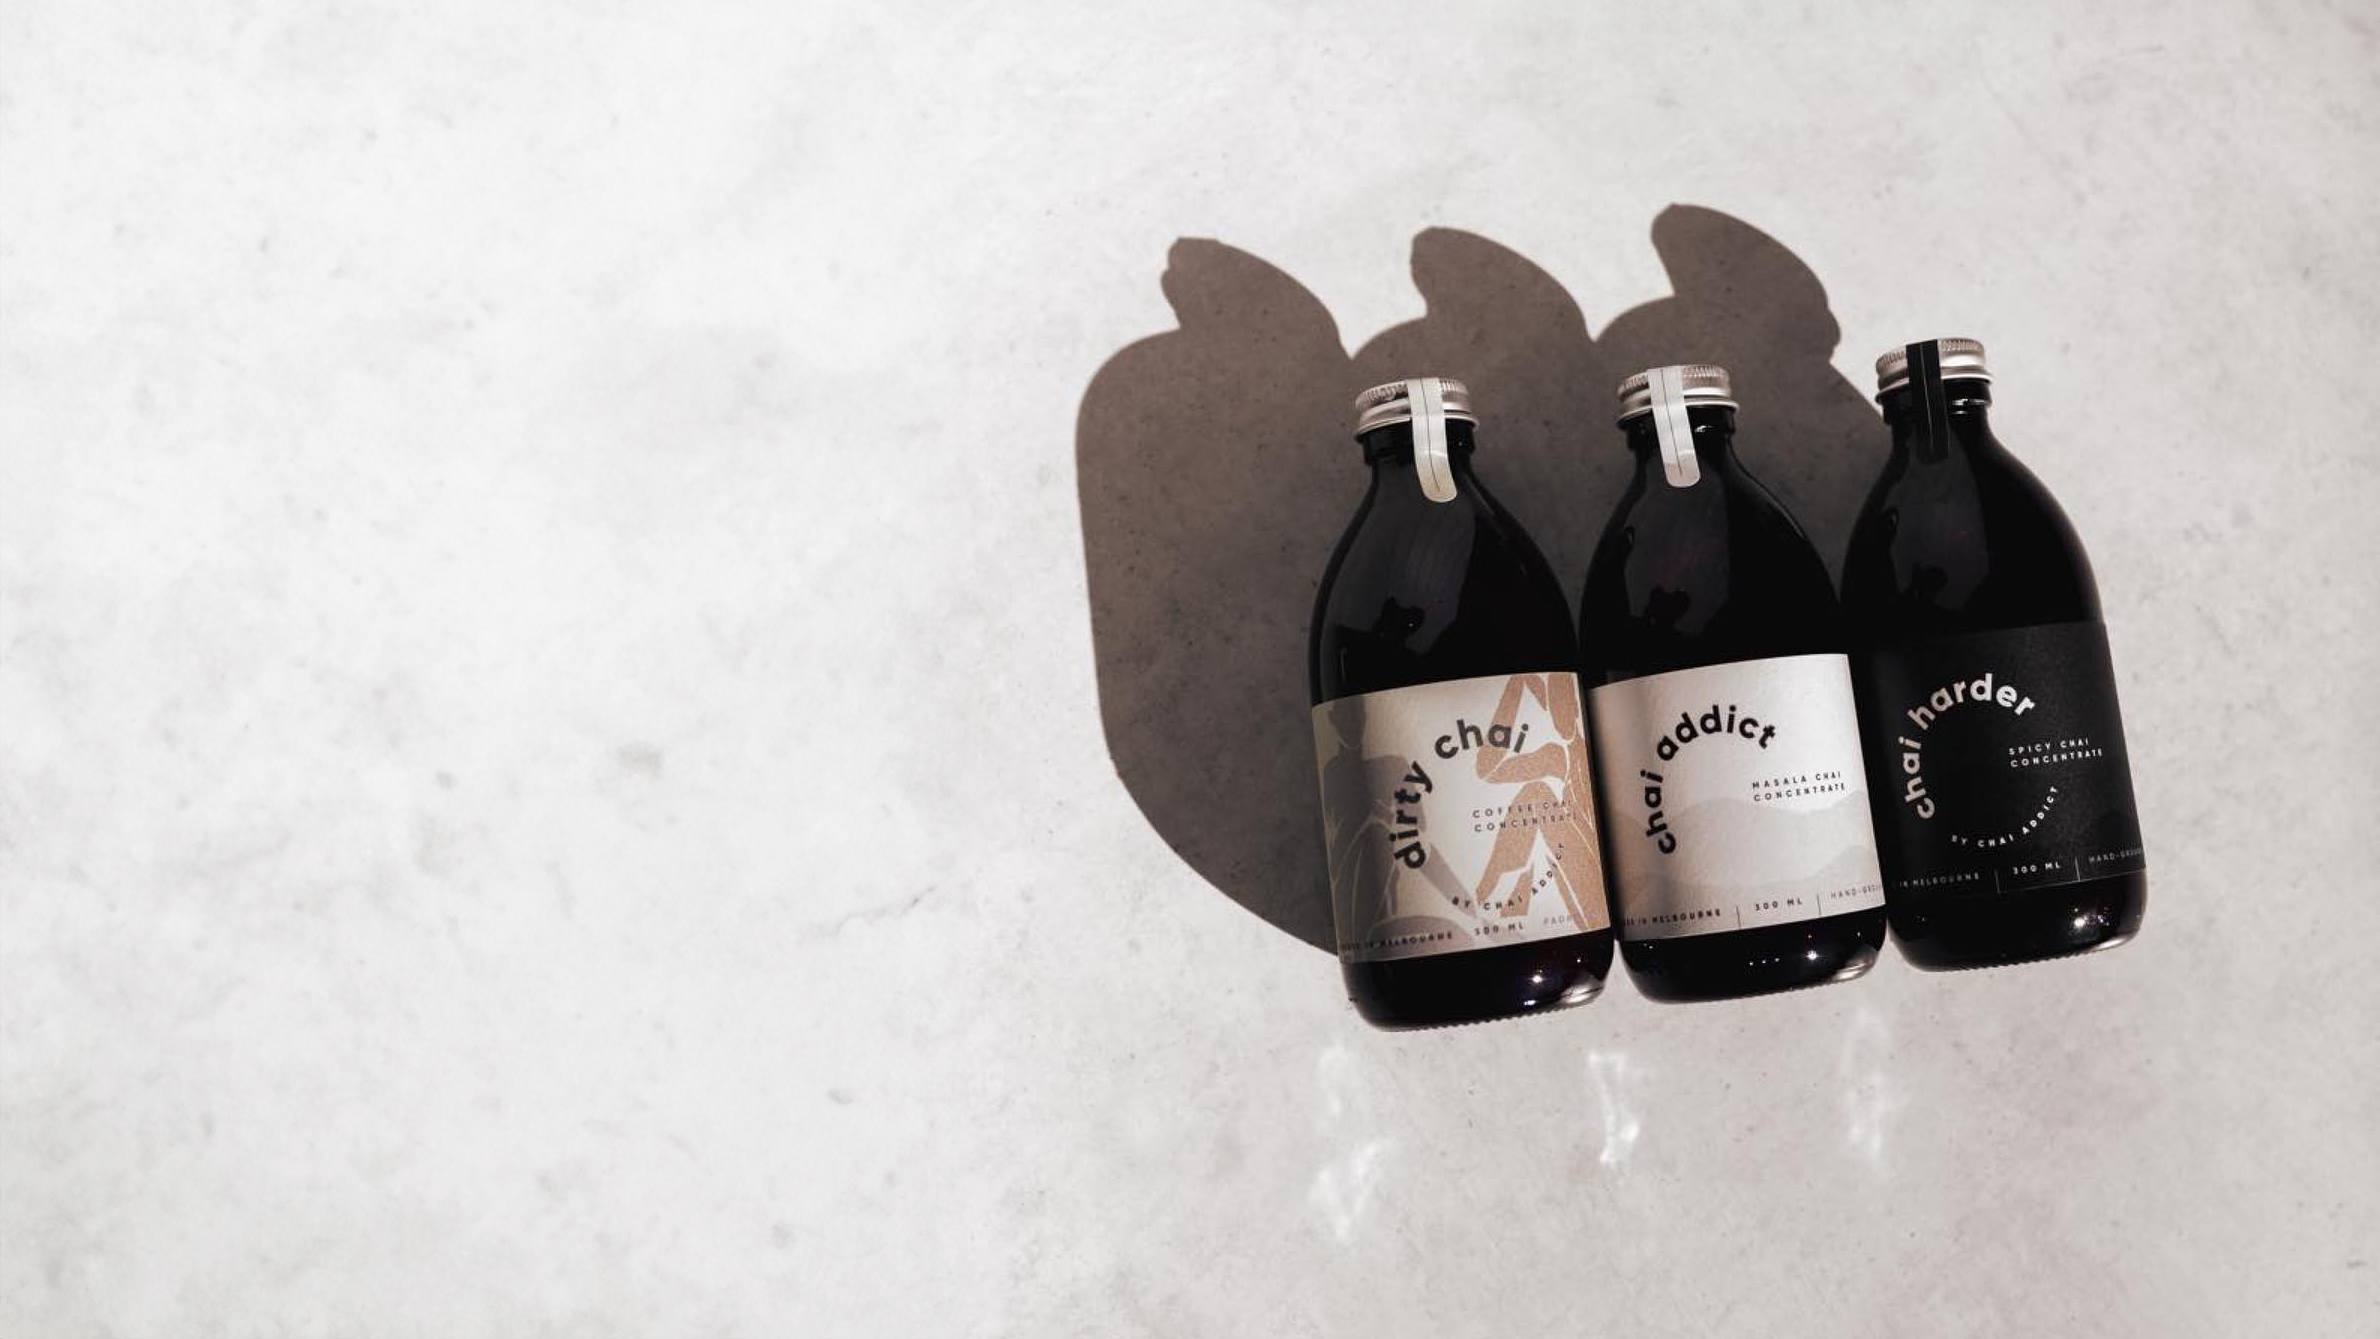 3 bottles of 300ml chai latte concentrates from left to right: dirty chai, chai addict, chai harder